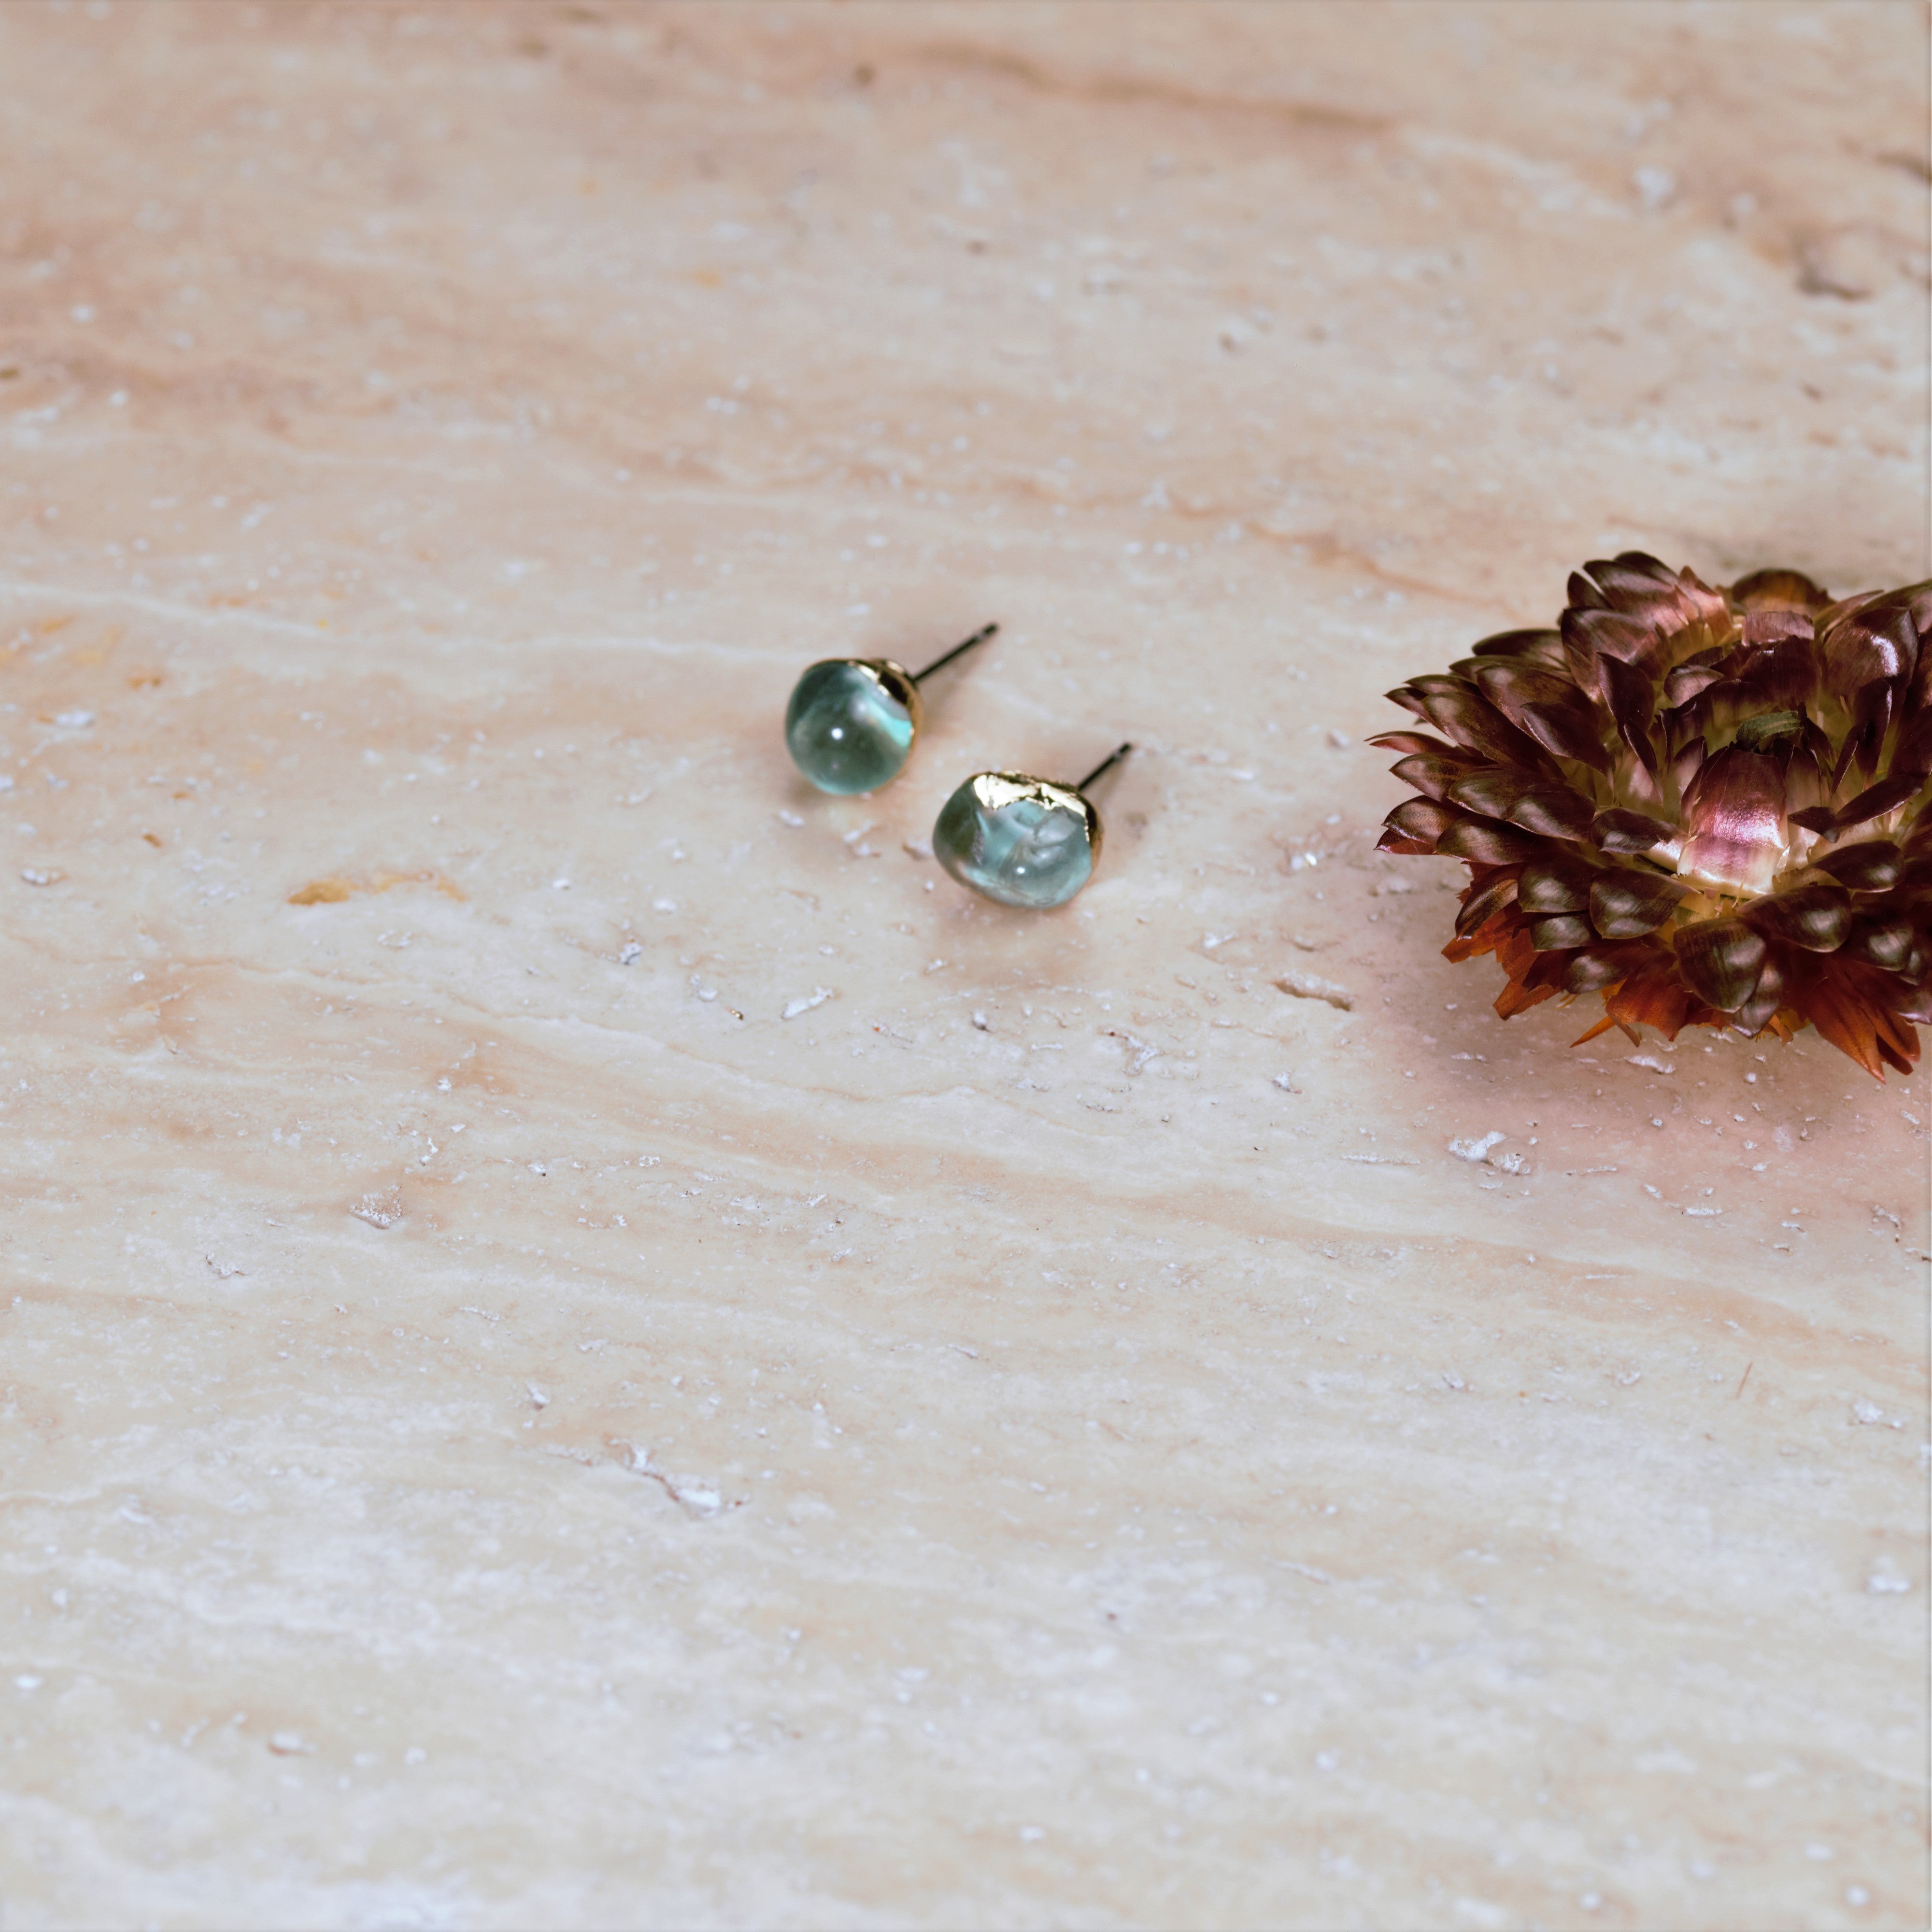 Flourite Earrings in Stainless Steel for Focus & Decision Making